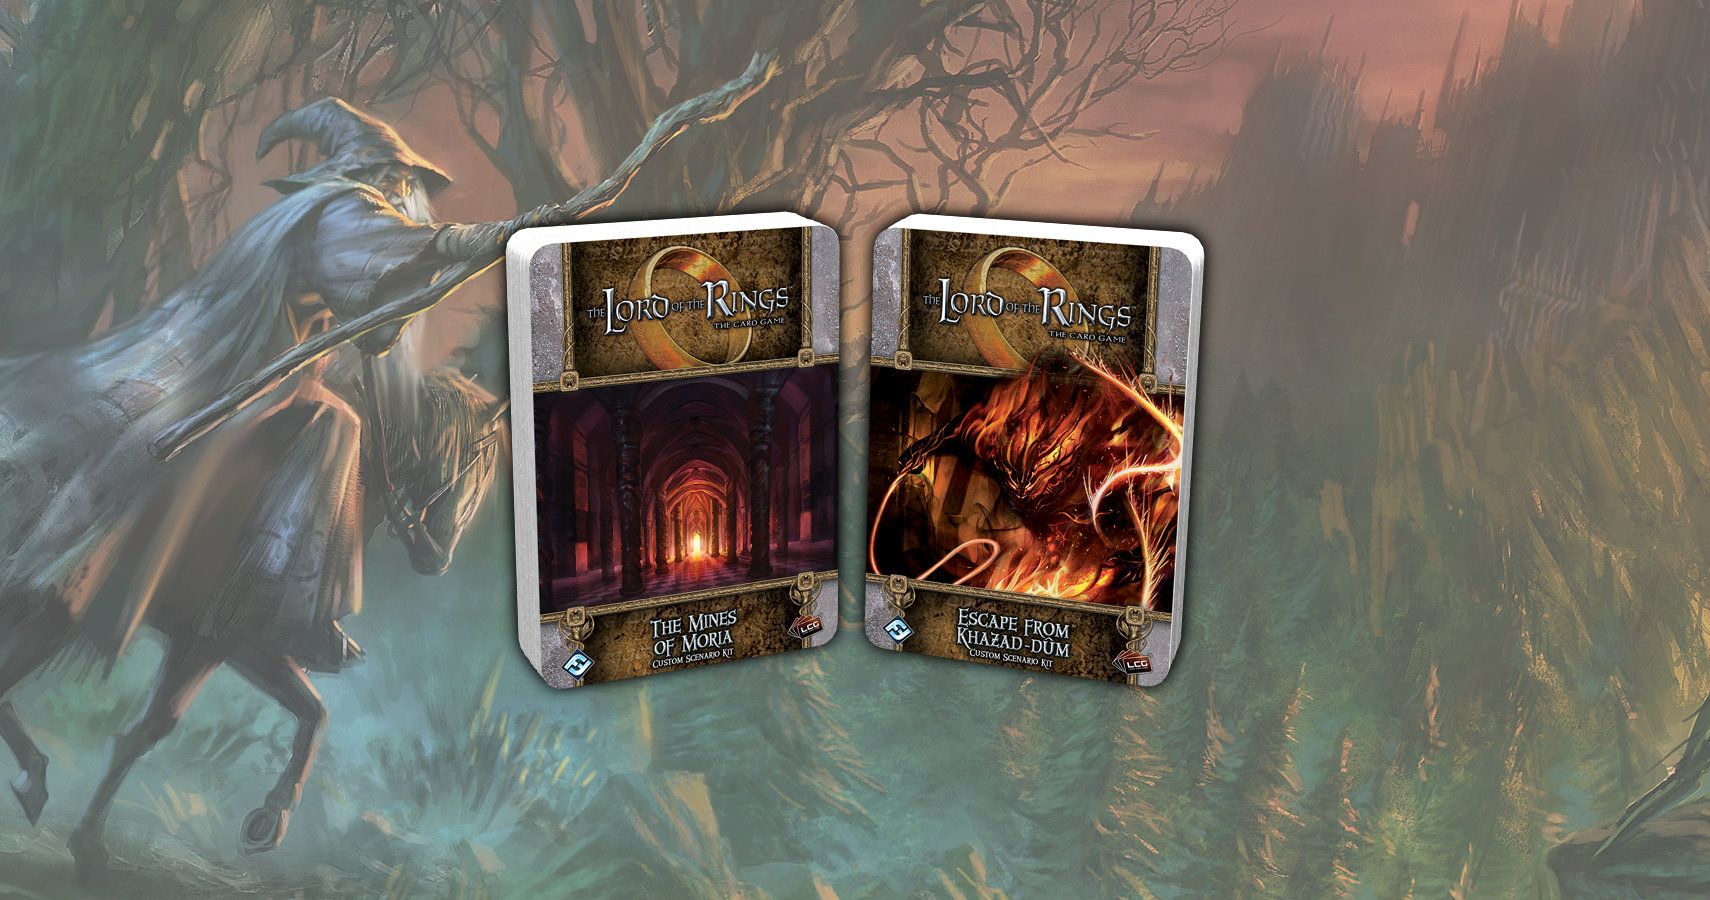 Two New Expansions Available Now For The Lord Of The Rings: The 